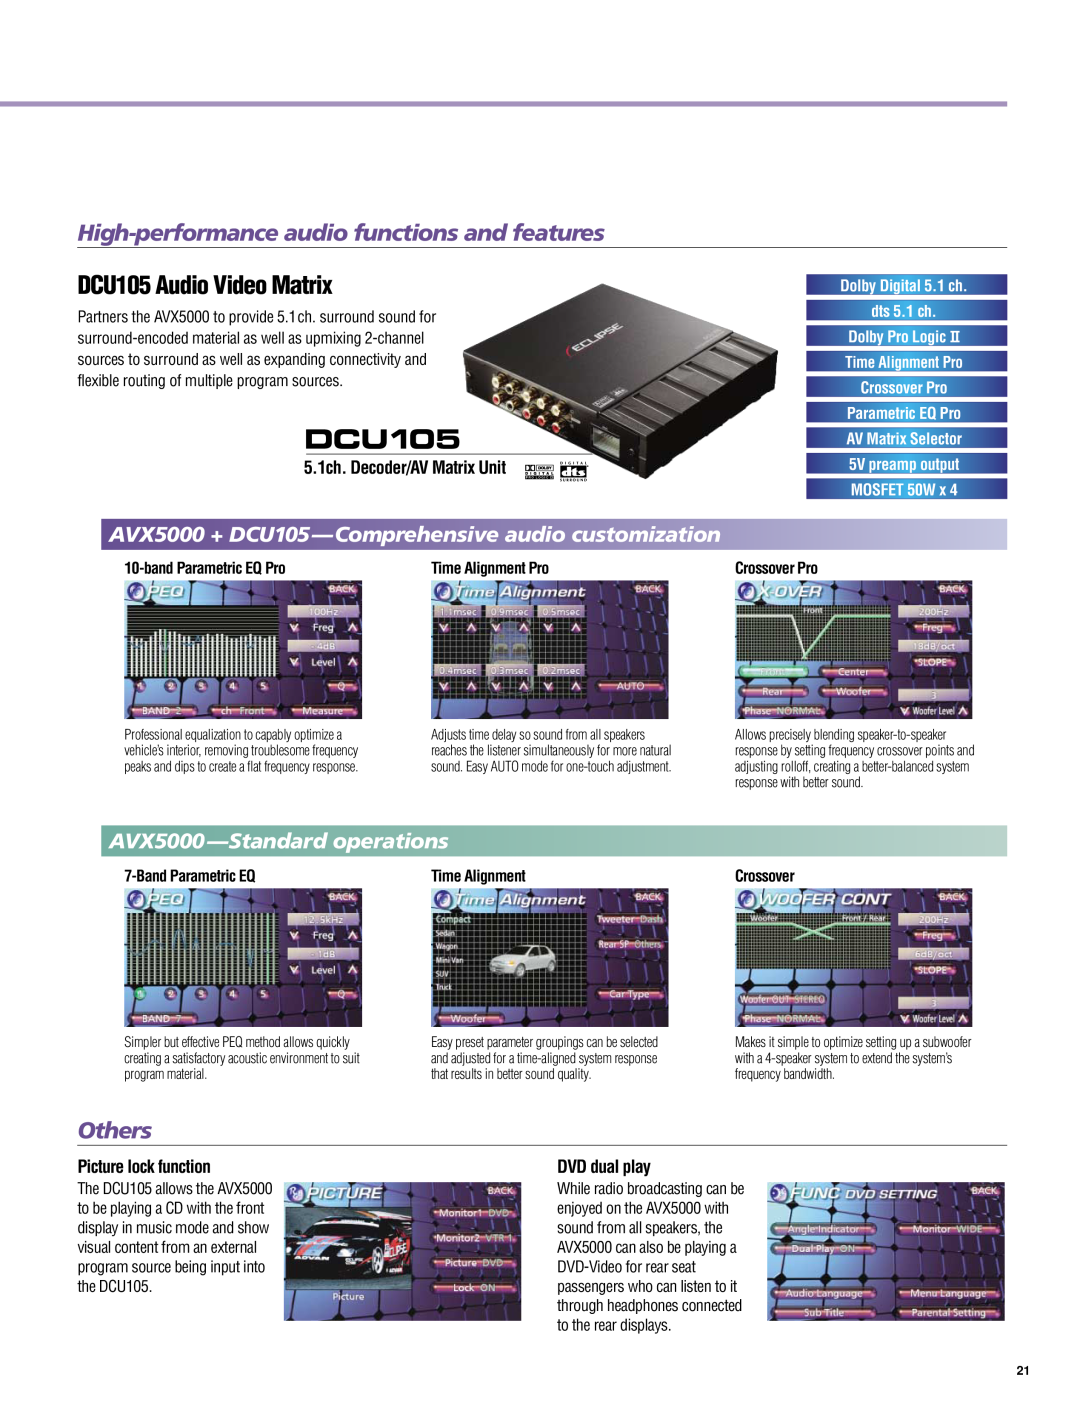 Eclipse - Fujitsu Ten AV8533, AVX5000 High-performance audio functions and features, Others, DCU105 Audio Video Matrix 